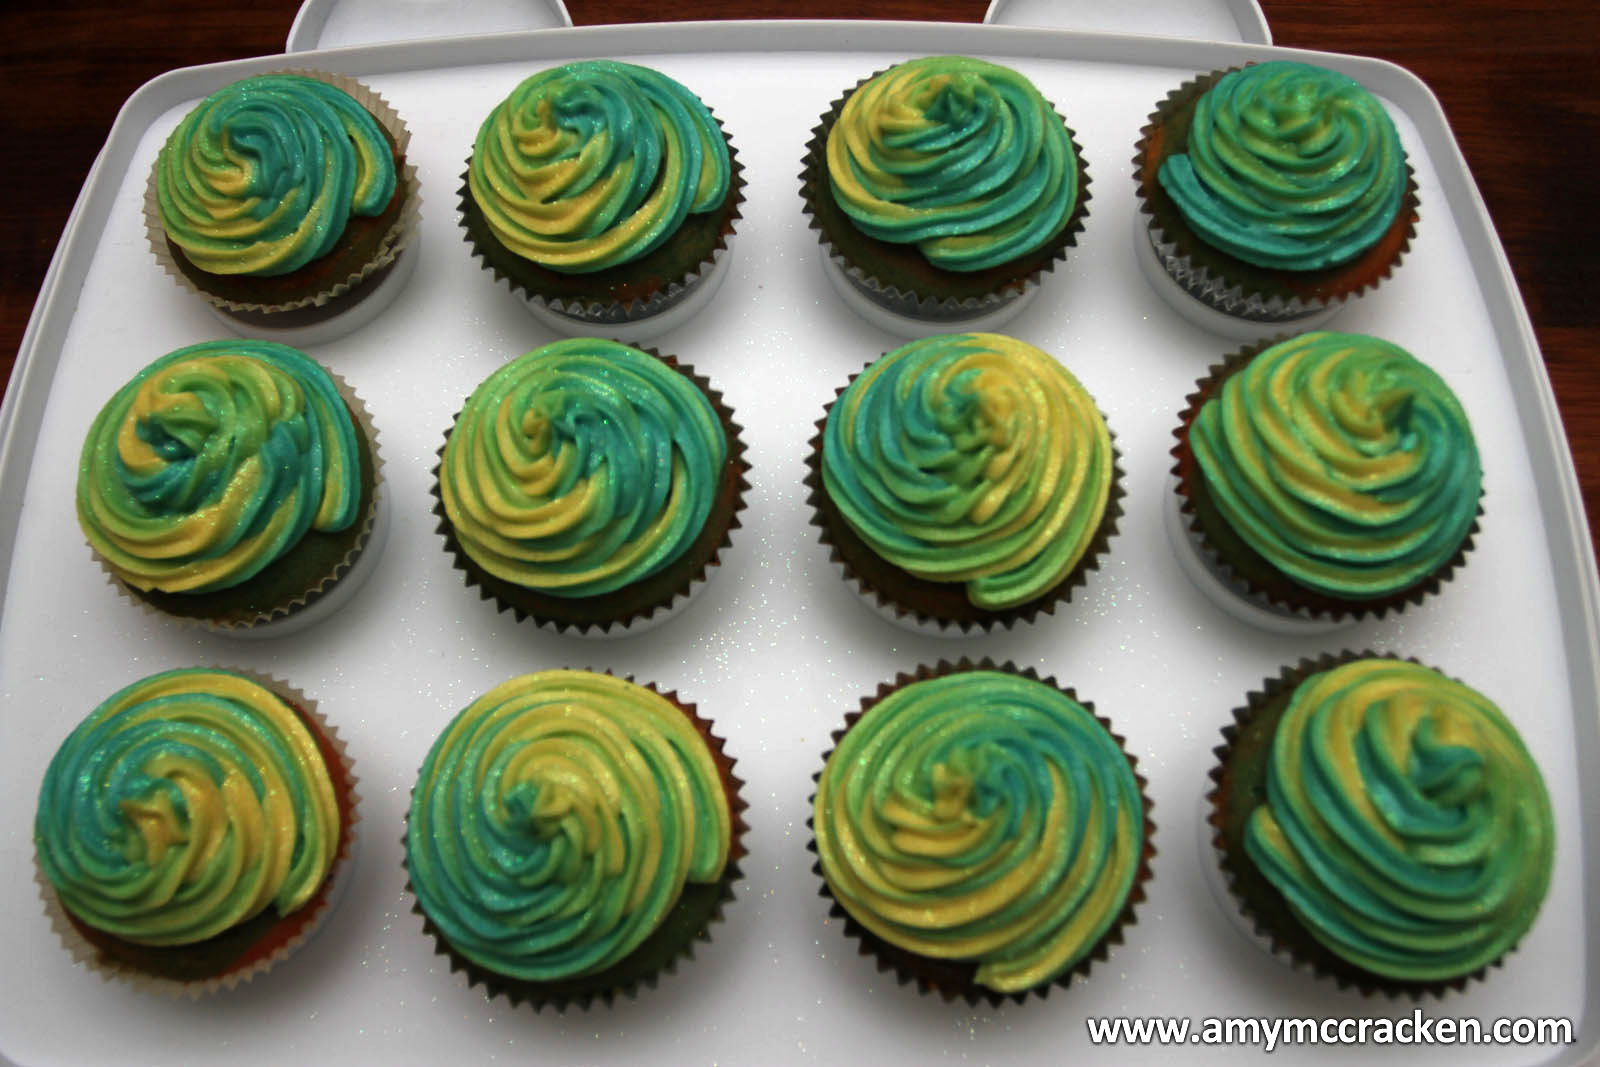 Rainbow Icing Cupcakes with Green